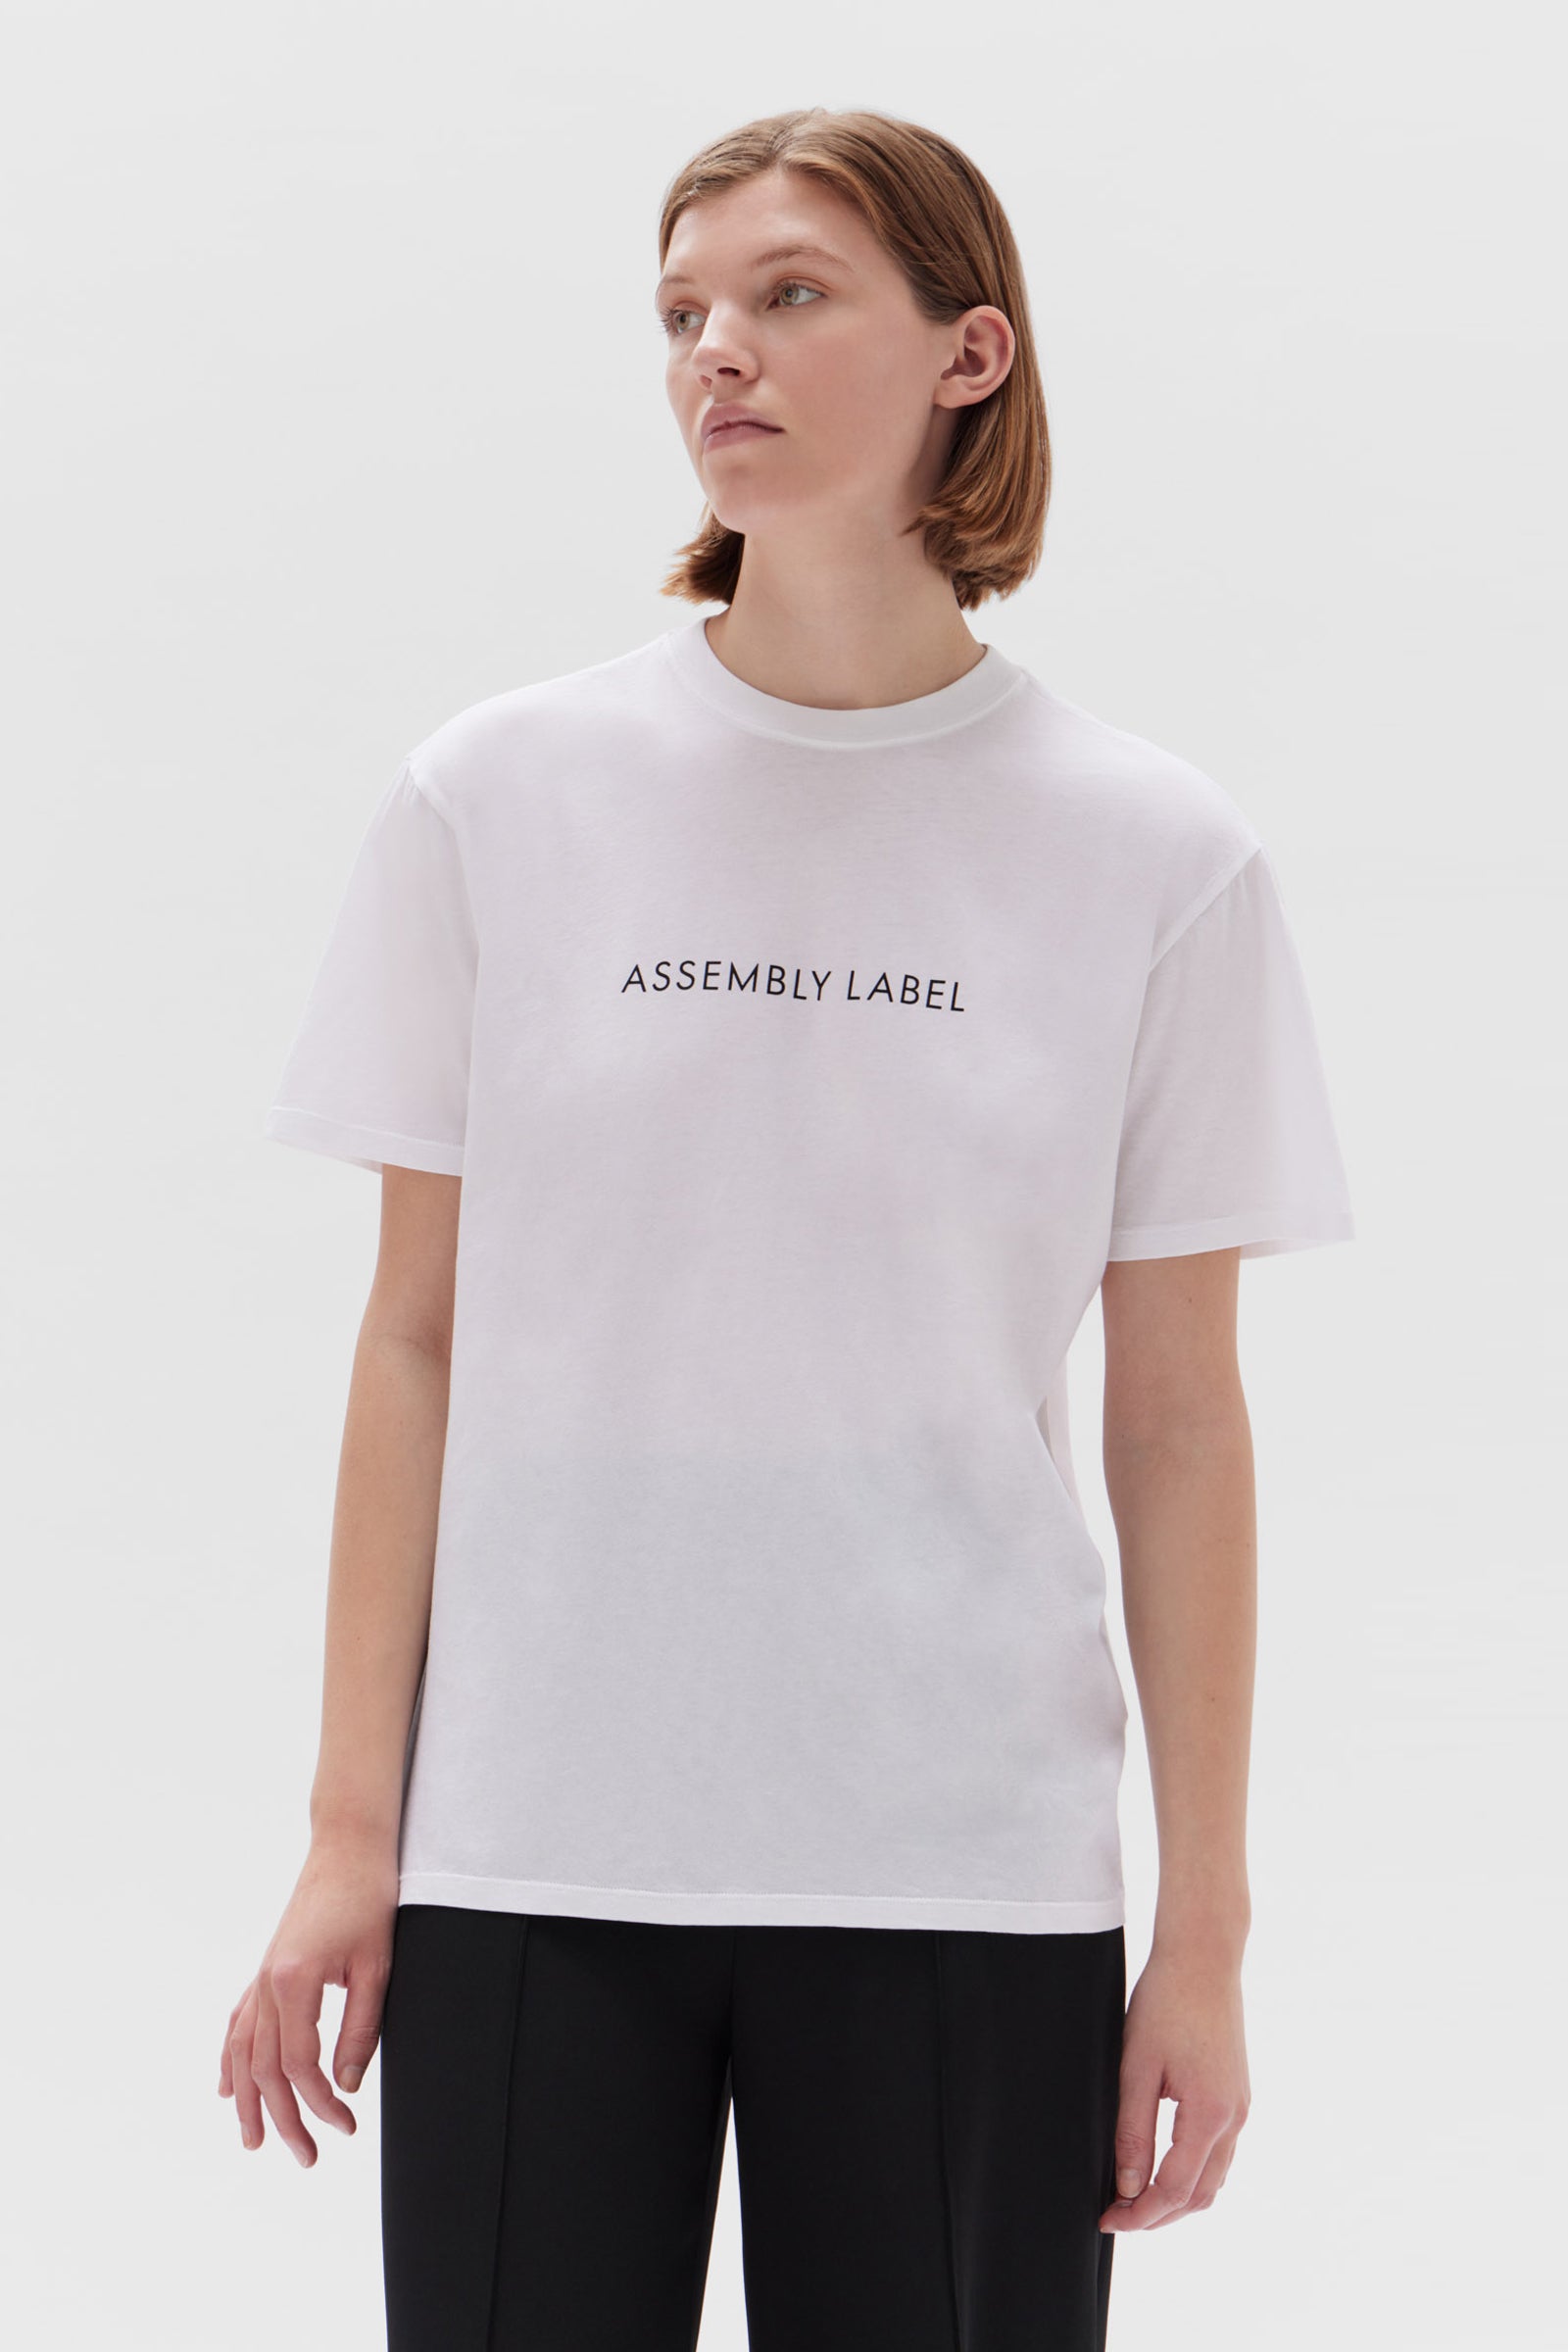 Assembly Label  Buy Assembly Label Clothing Online Australia- THE